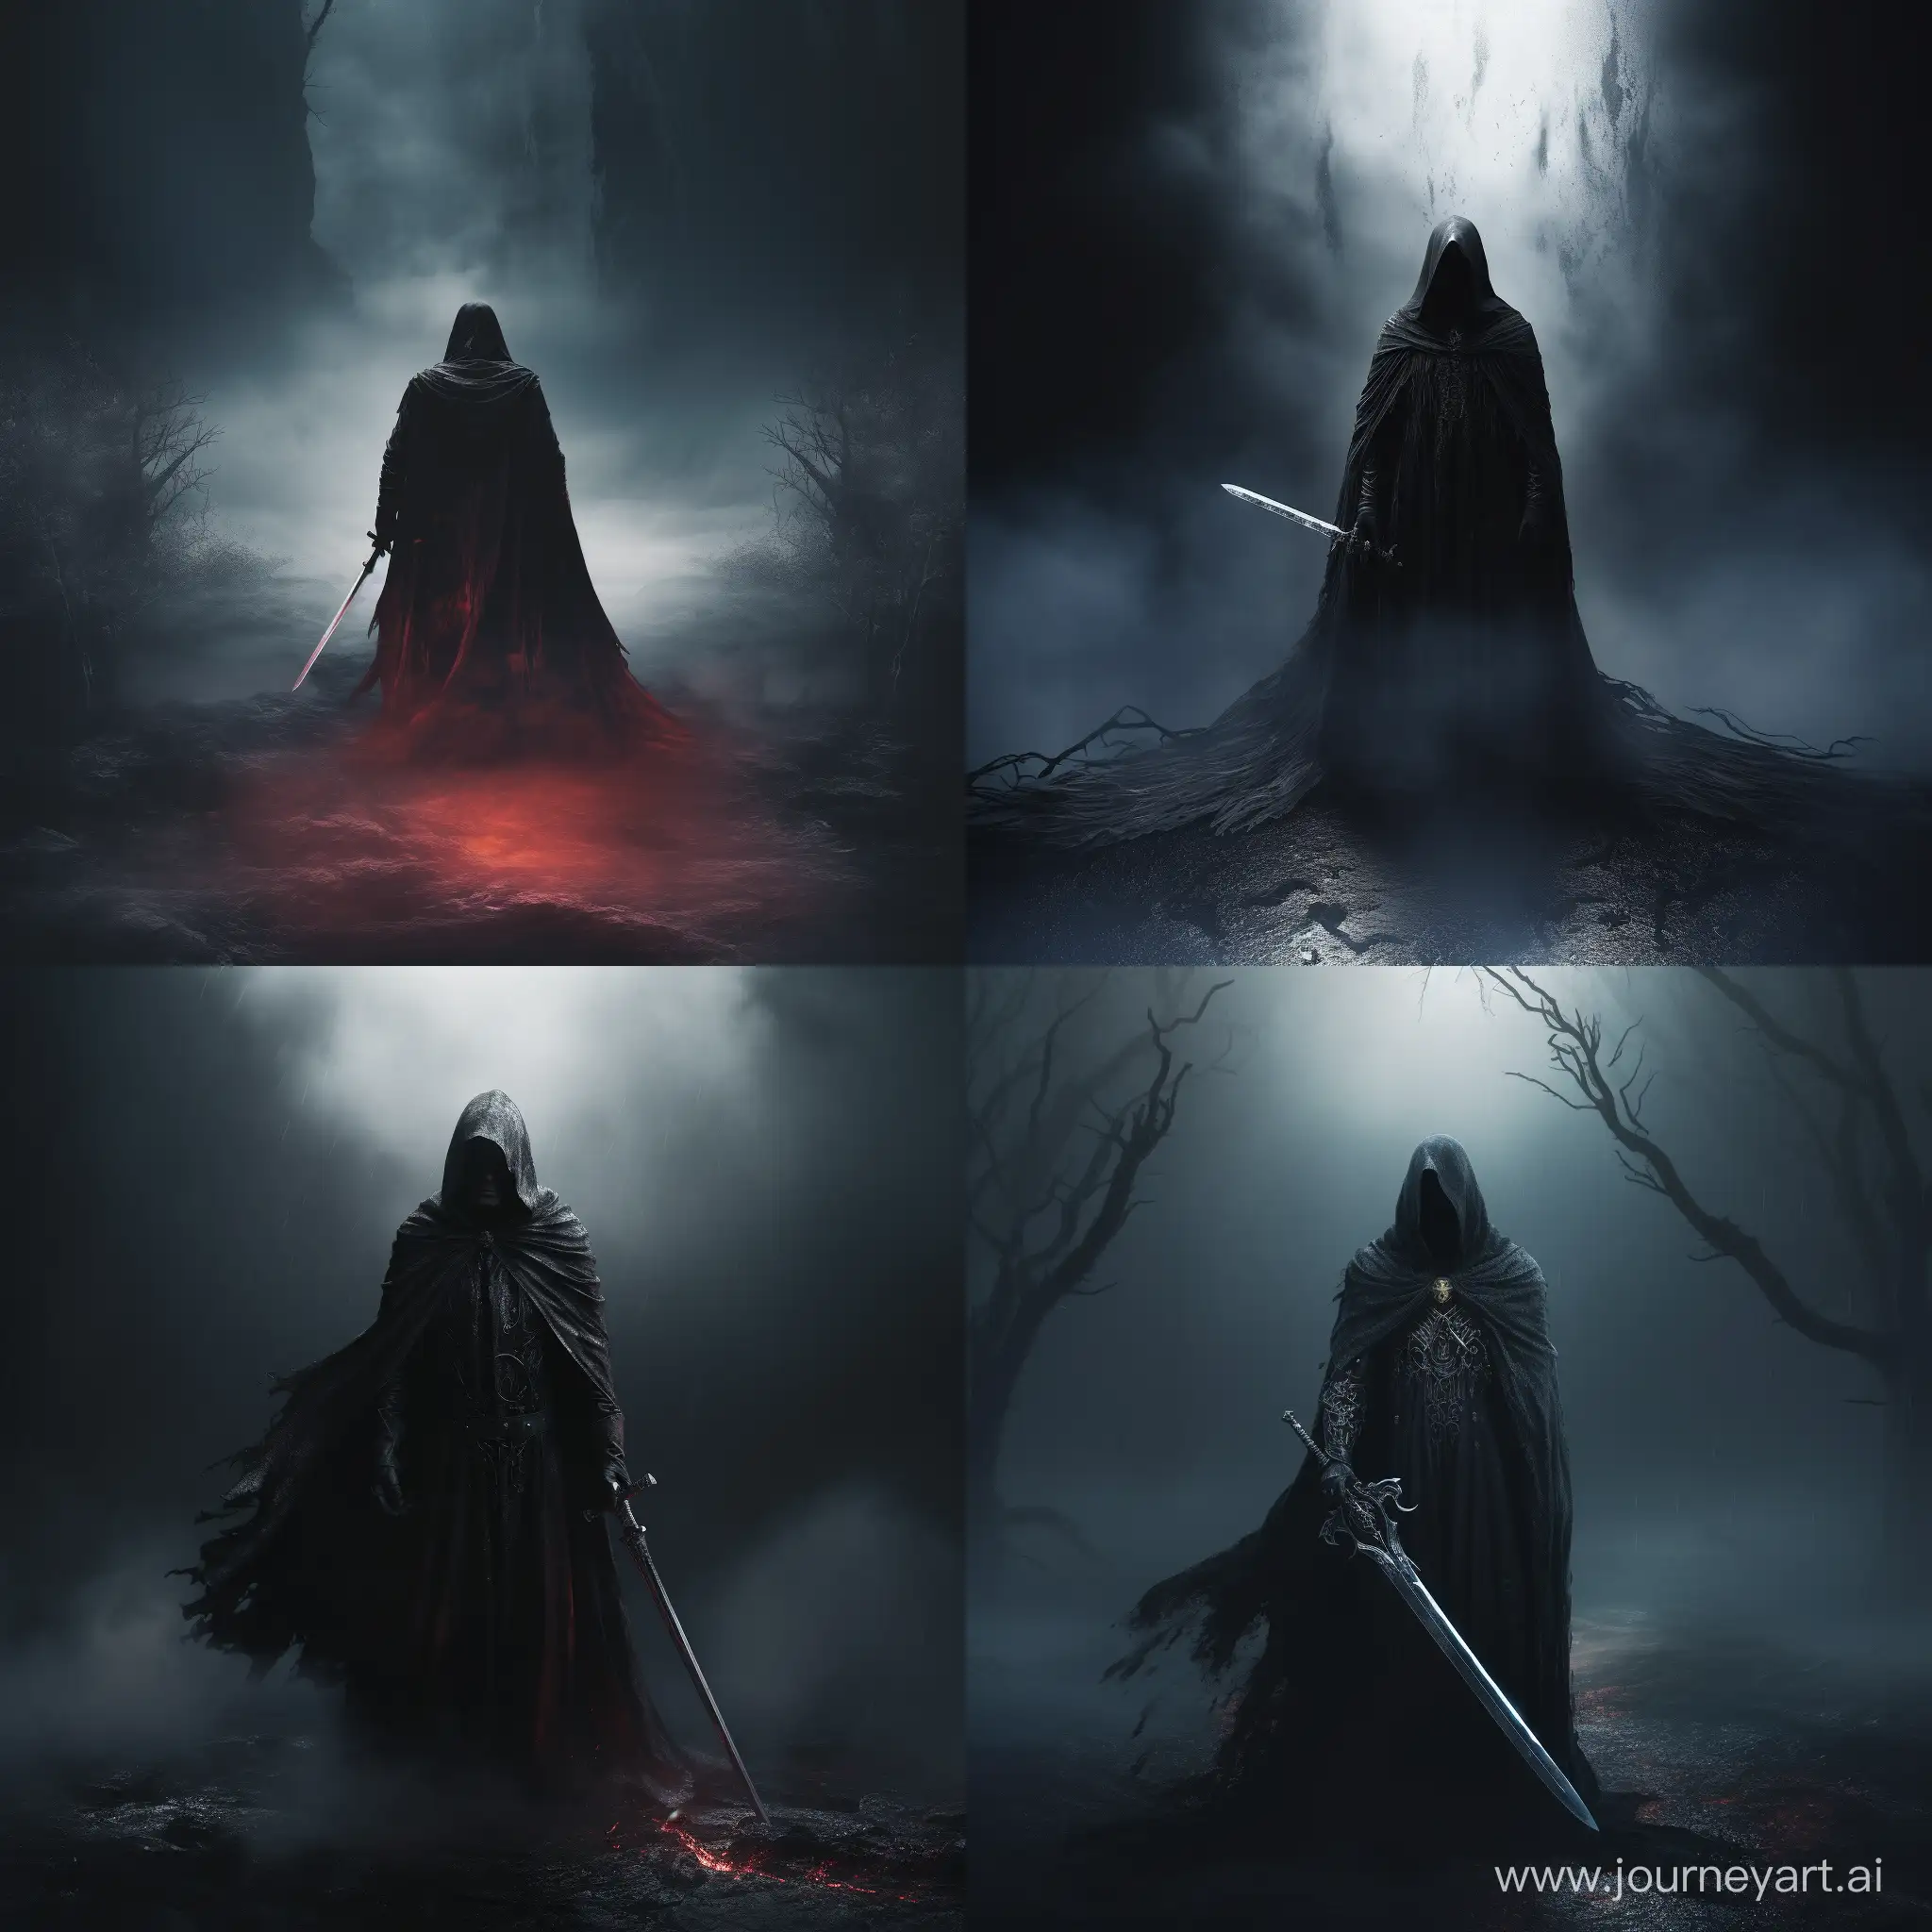 Mysterious-Cloaked-Figure-Wielding-a-Sword-in-the-Depths-of-Dark-Fantasy